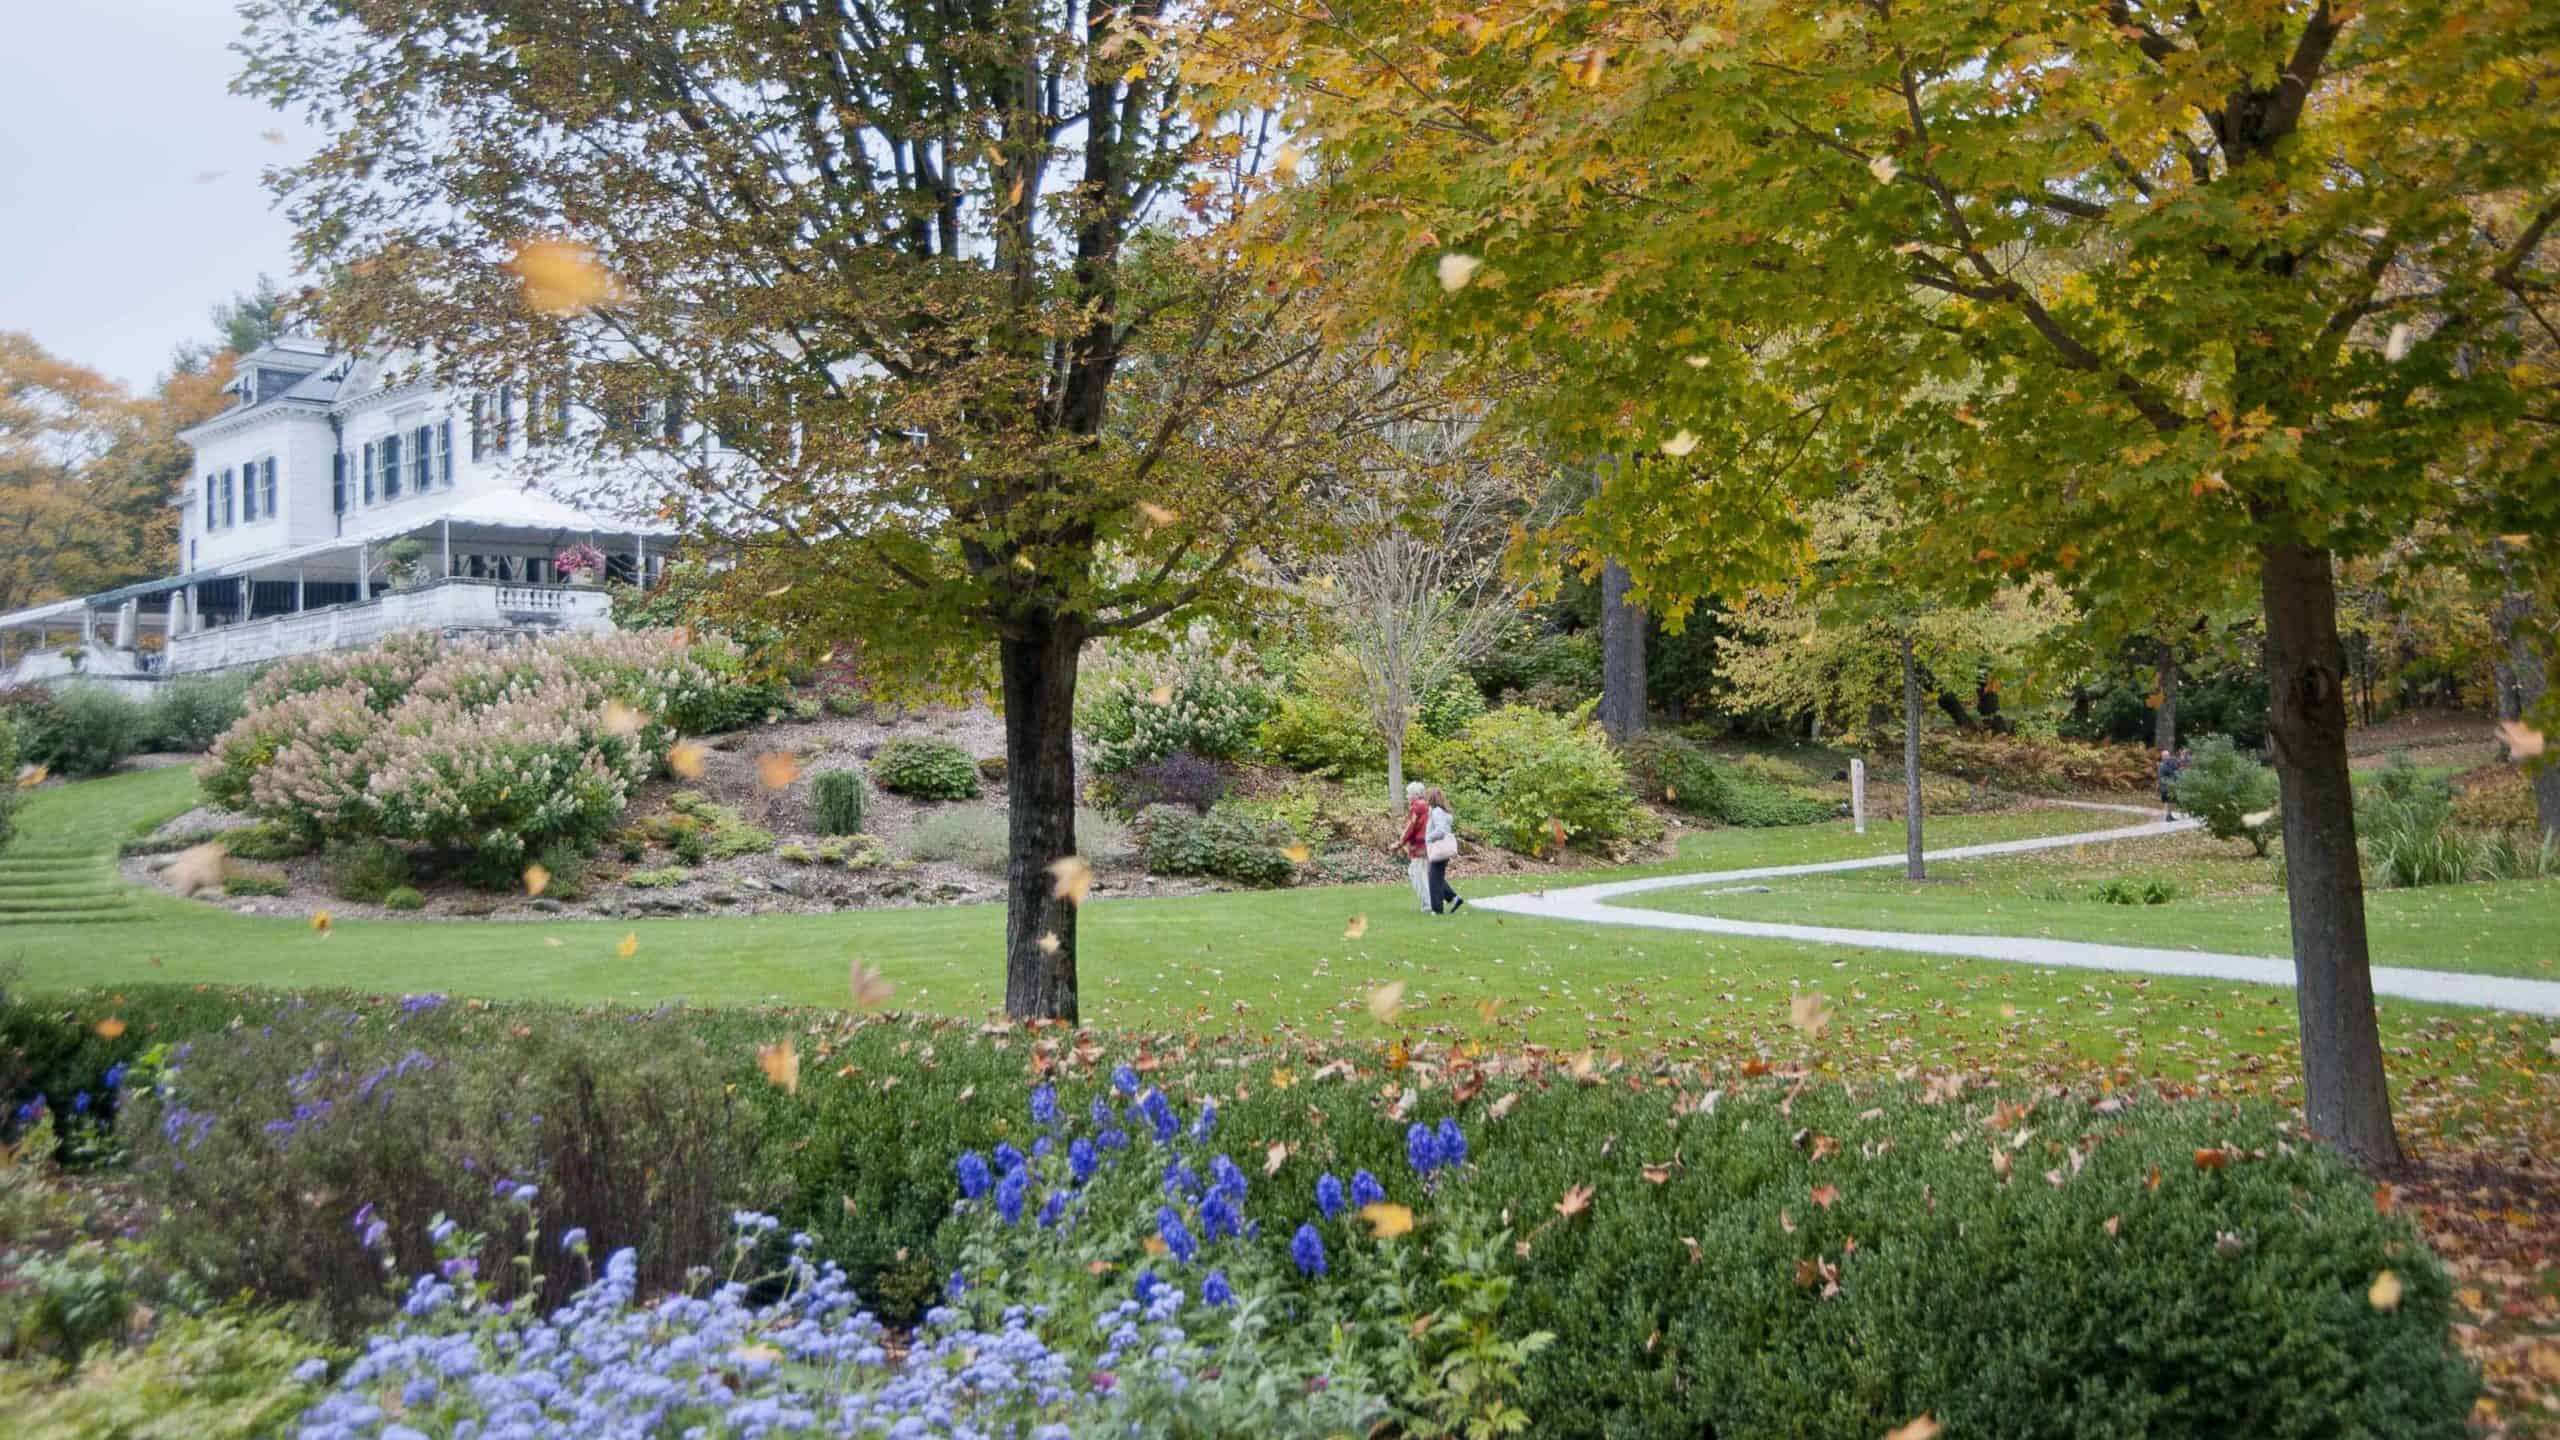 Edith Wharton's gardens turn blue and gold in the fall. Press photo courtesy of the Mount